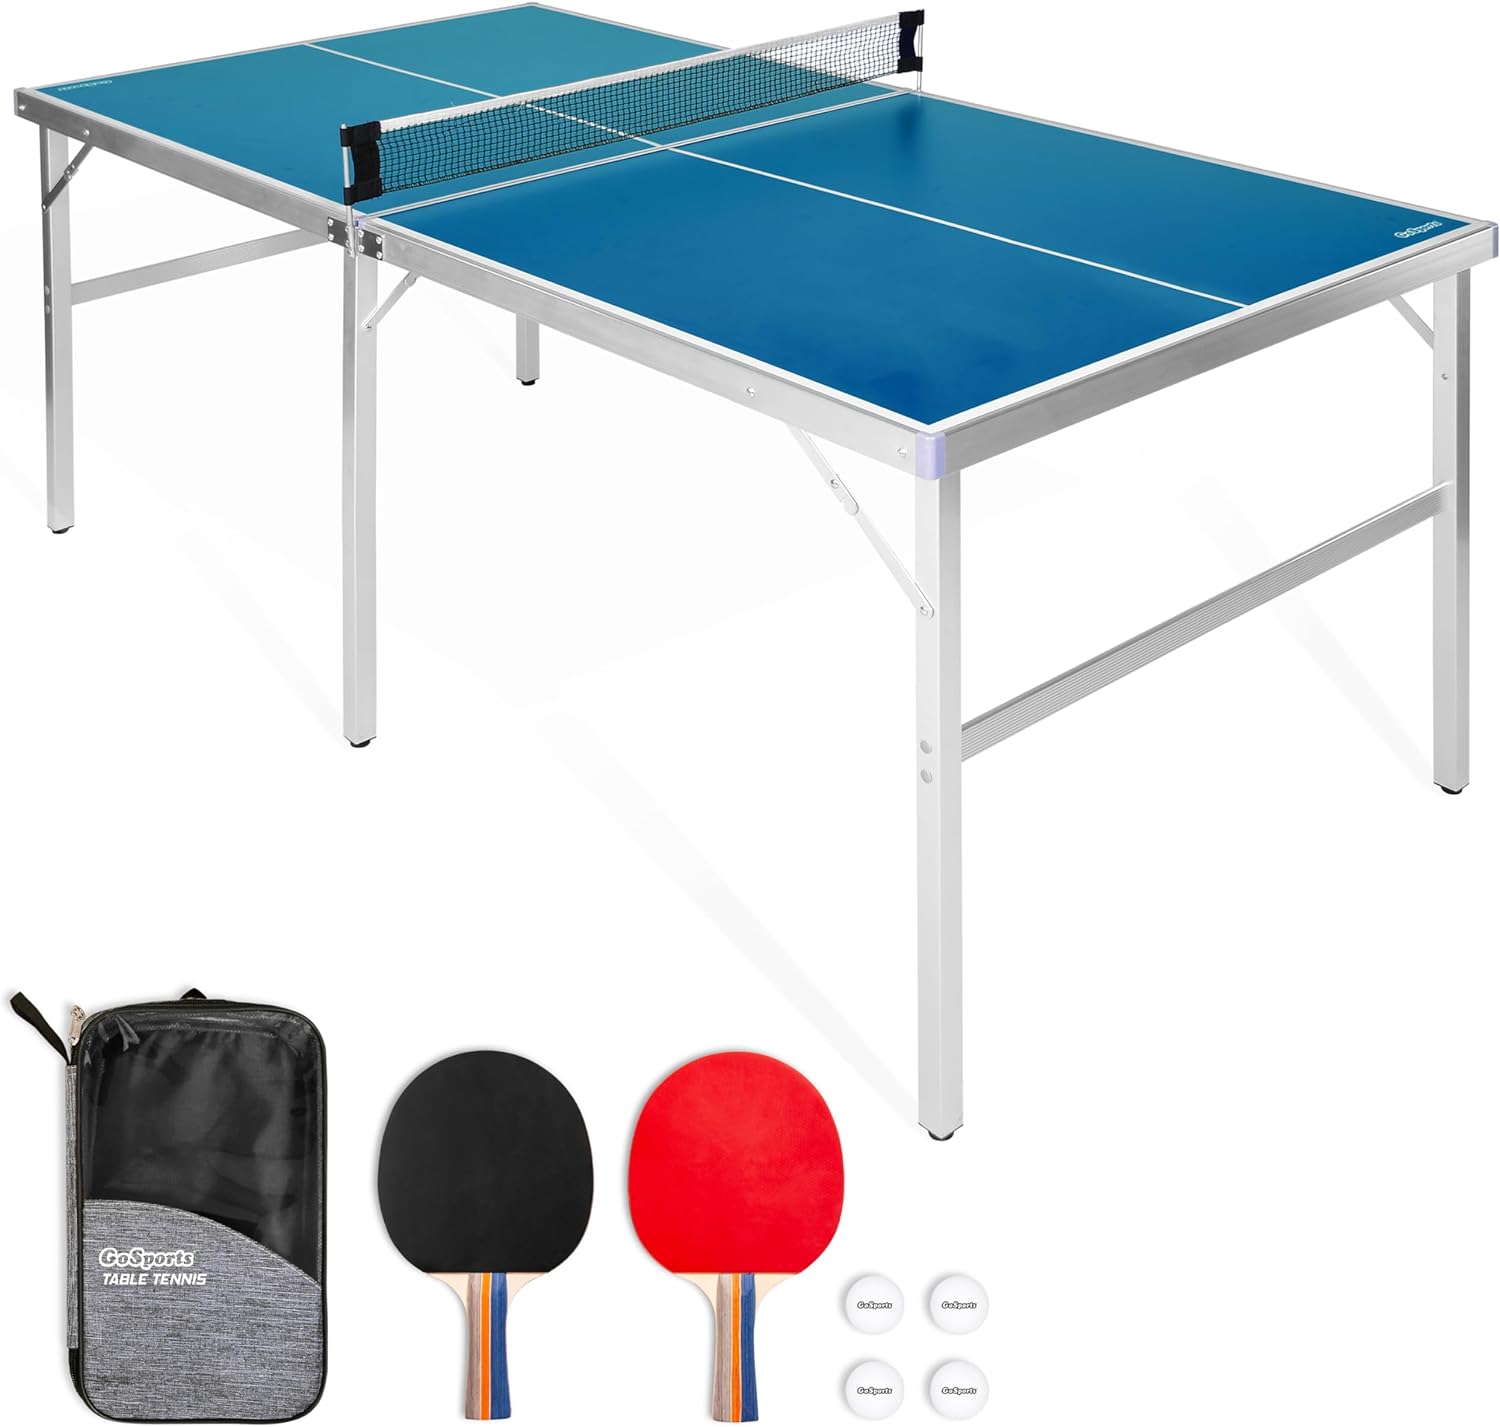 Best Ping Pong Table: Top Picks for Ultimate Gaming Fun